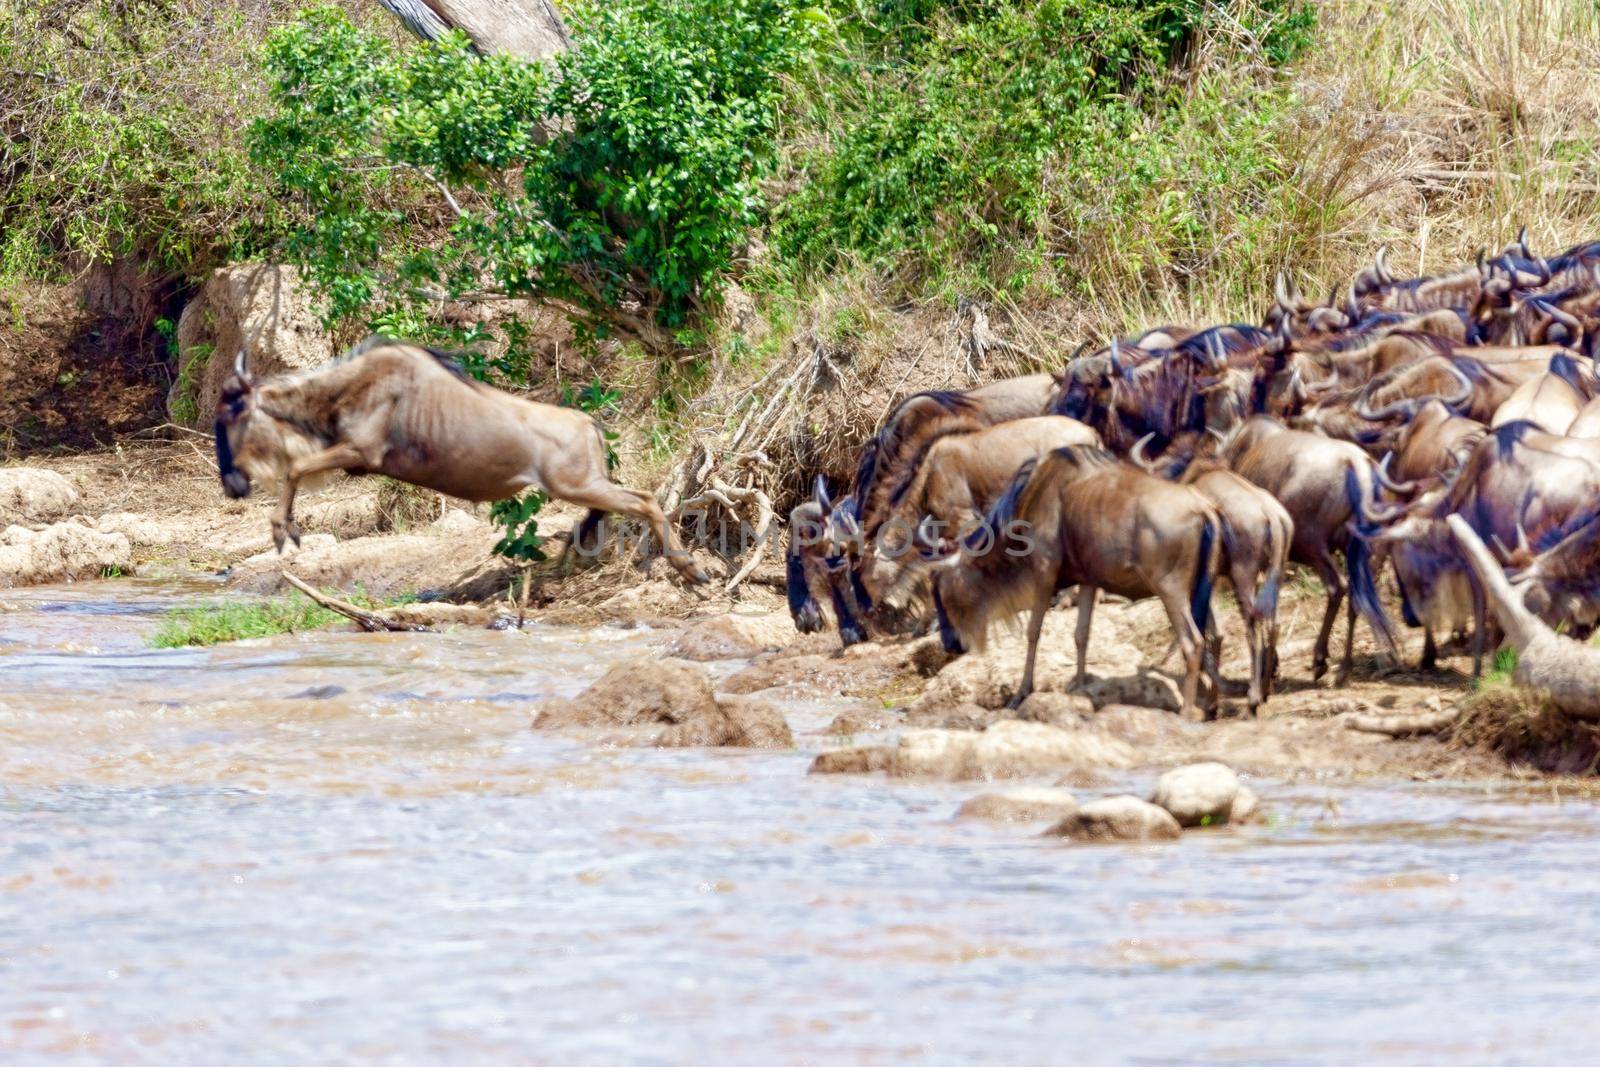 Crossing Kenya. National park. Wildebeests and zebras cross the river. Concept of wildlife, wildlife conservation. Travel concept, photo safari.